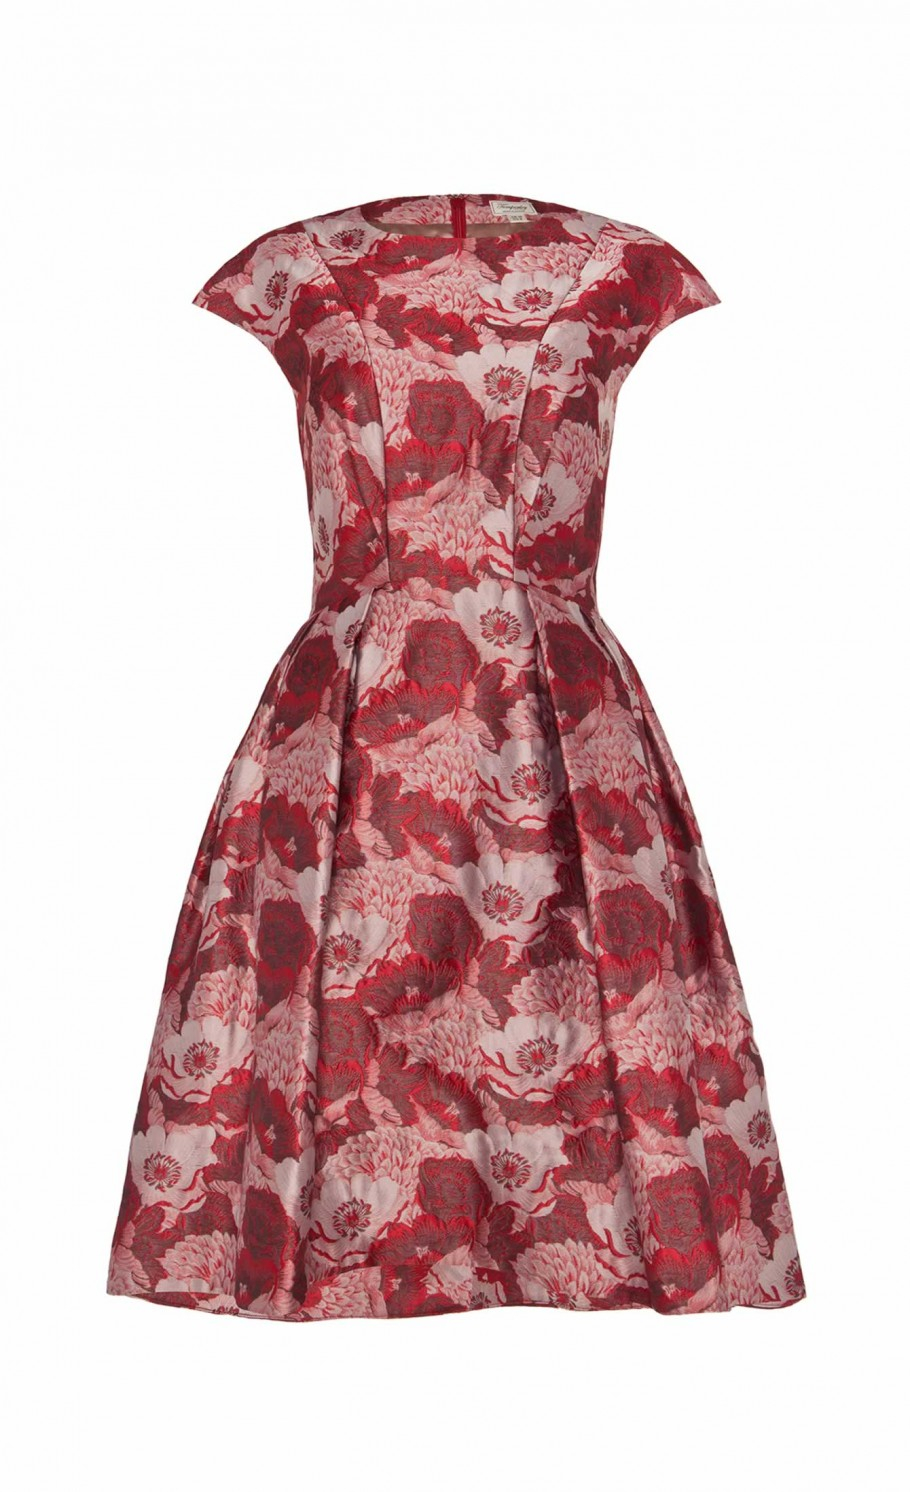 Lyst - Temperley London Rosa Jacquard Structured Dress in Red